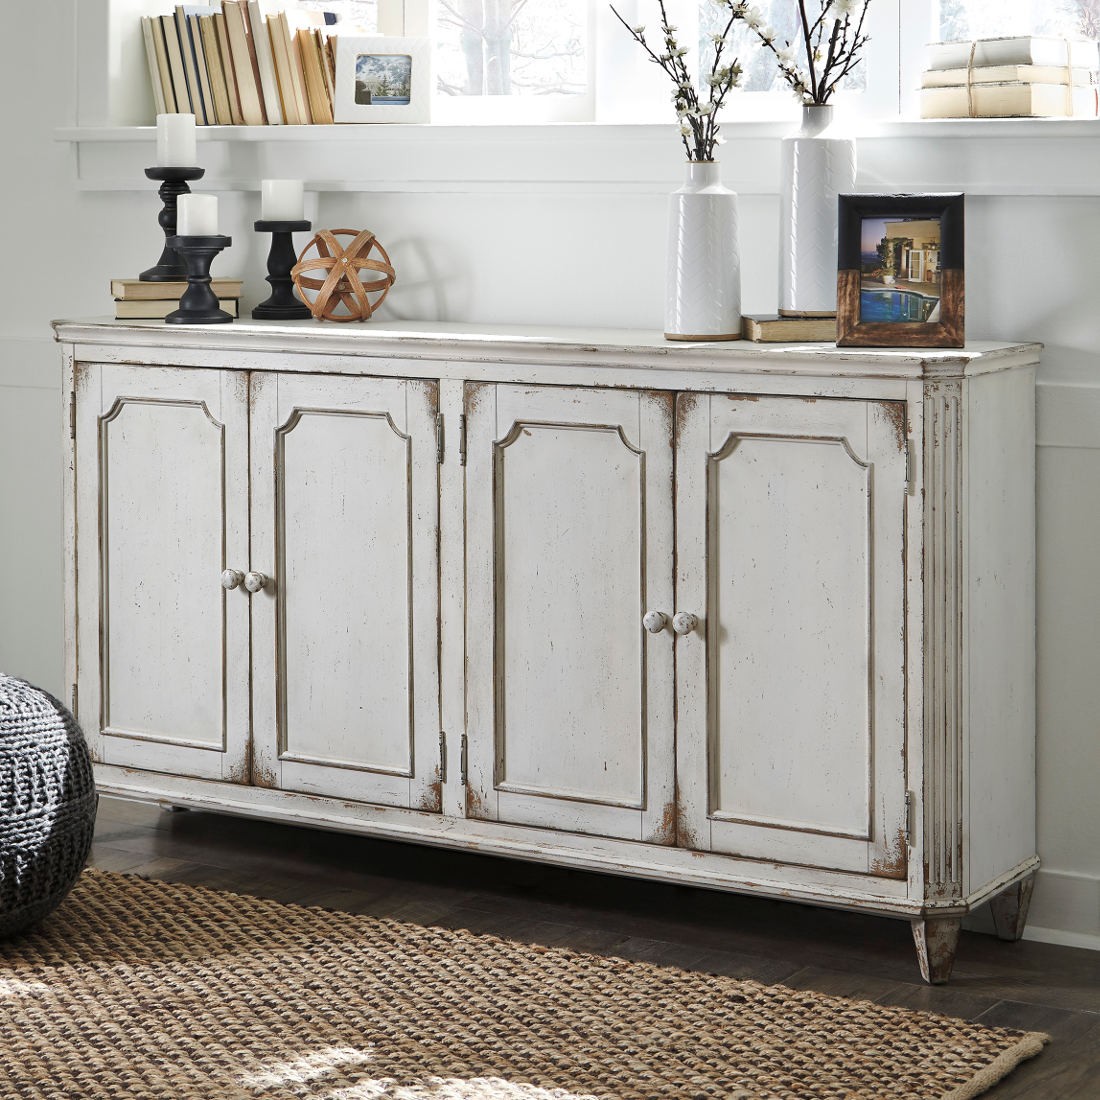 door bayside accent target one lombardy storage jaycob mirimyn white and cabinets tall small whitewashed cabinet chests corner antique rustic table full size high tops bar metal